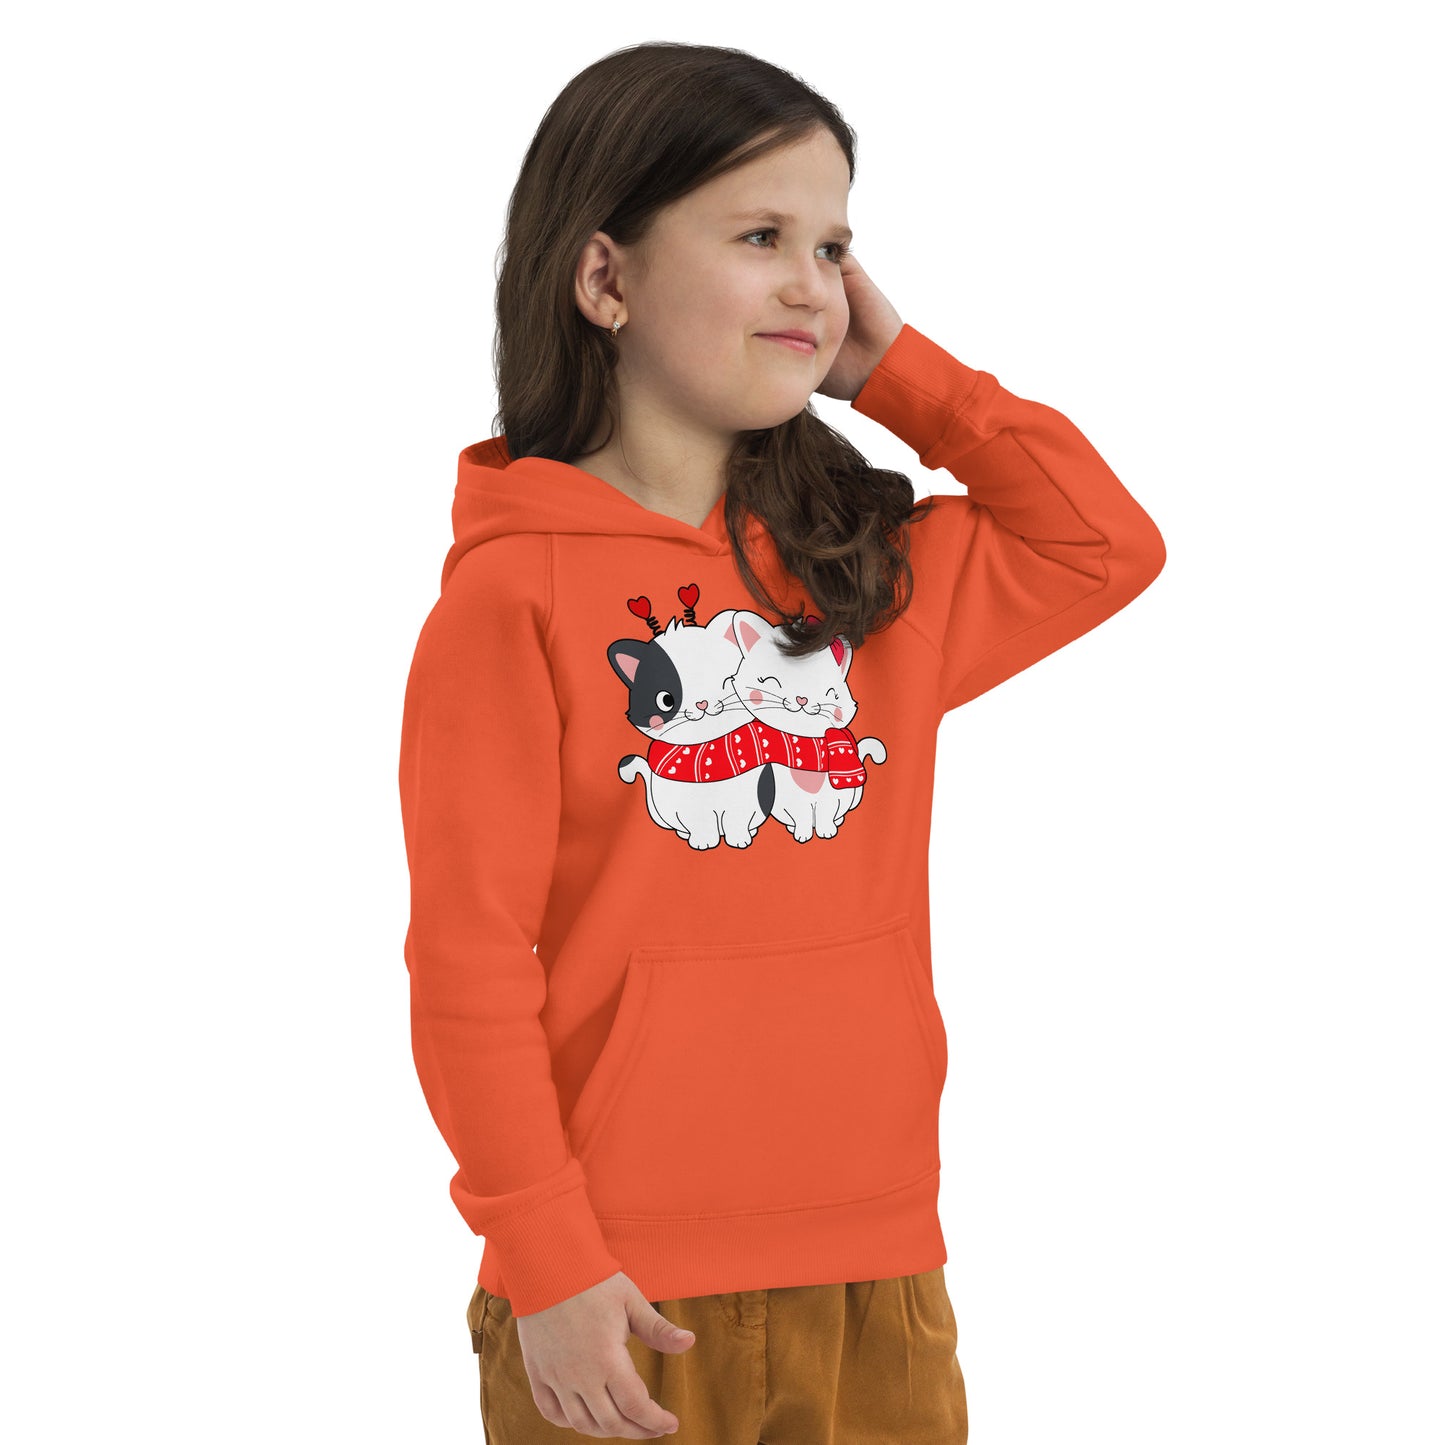 Lovely Couple Cats in Love Hoodie, No. 0470